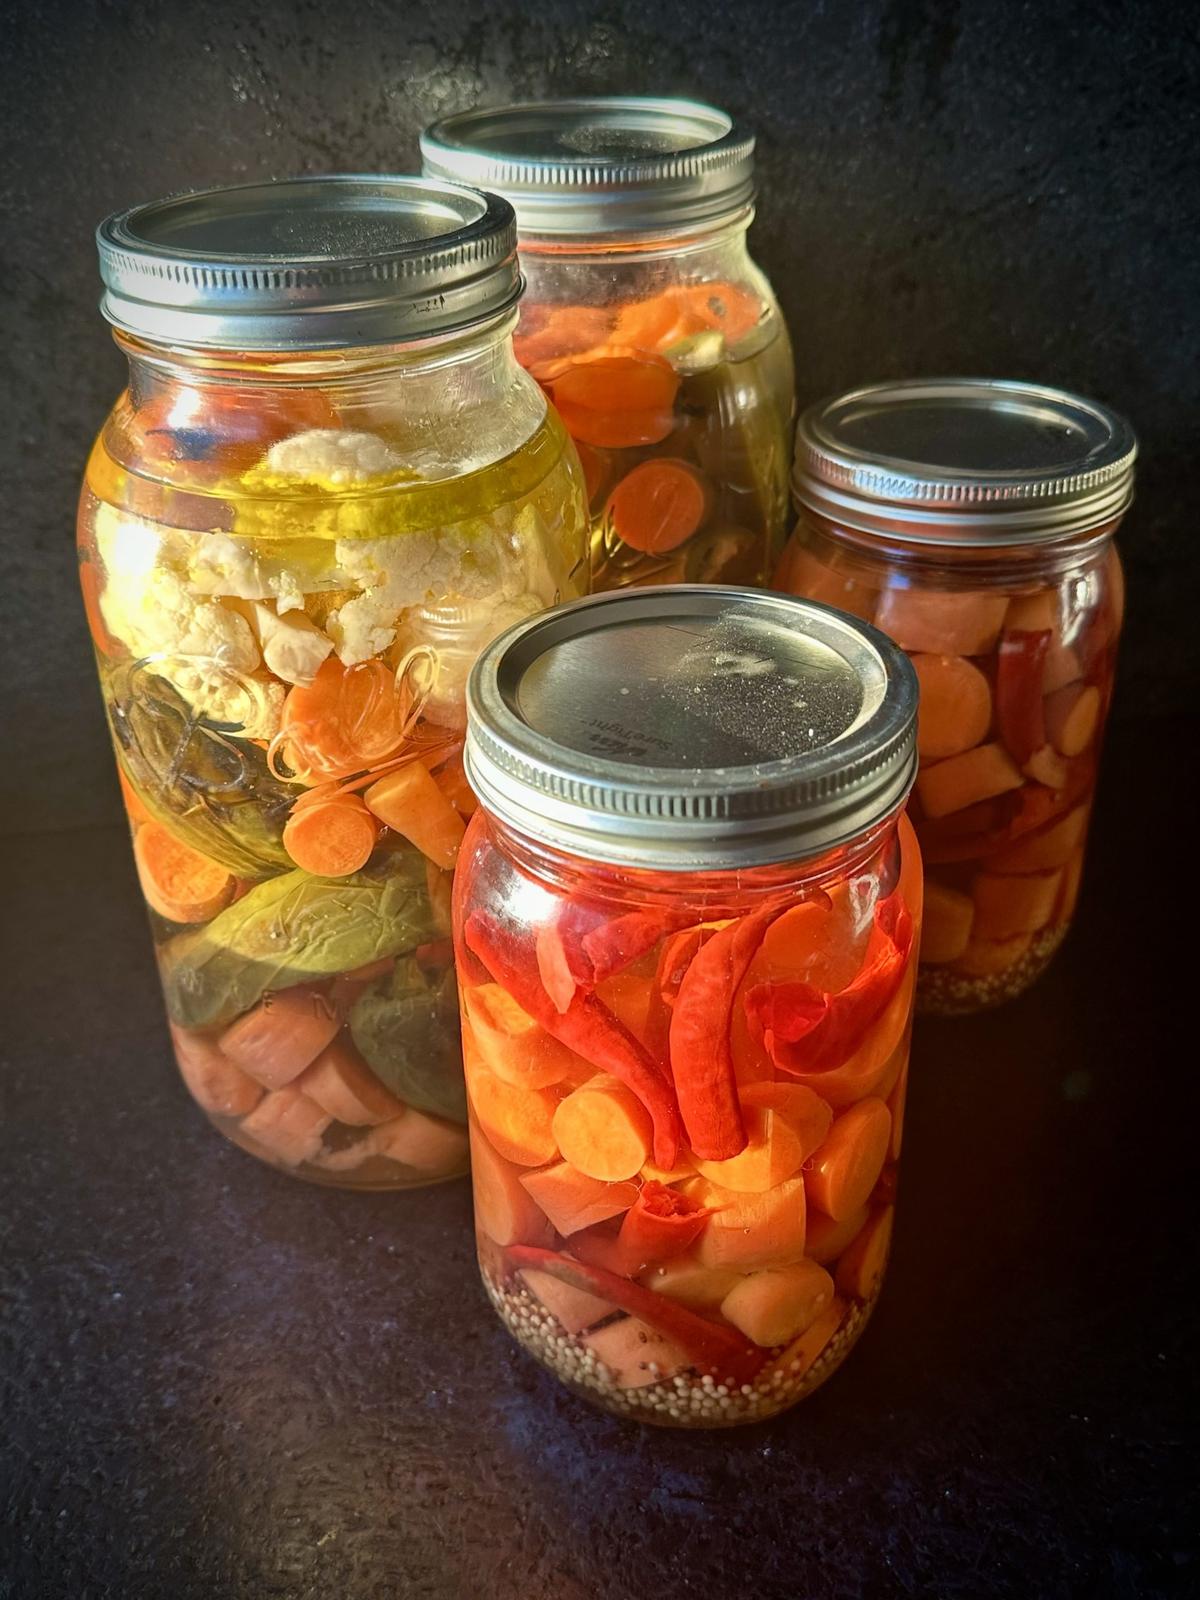 No canning skills are required for these easy refrigerator pickles. (Ari LeVaux)